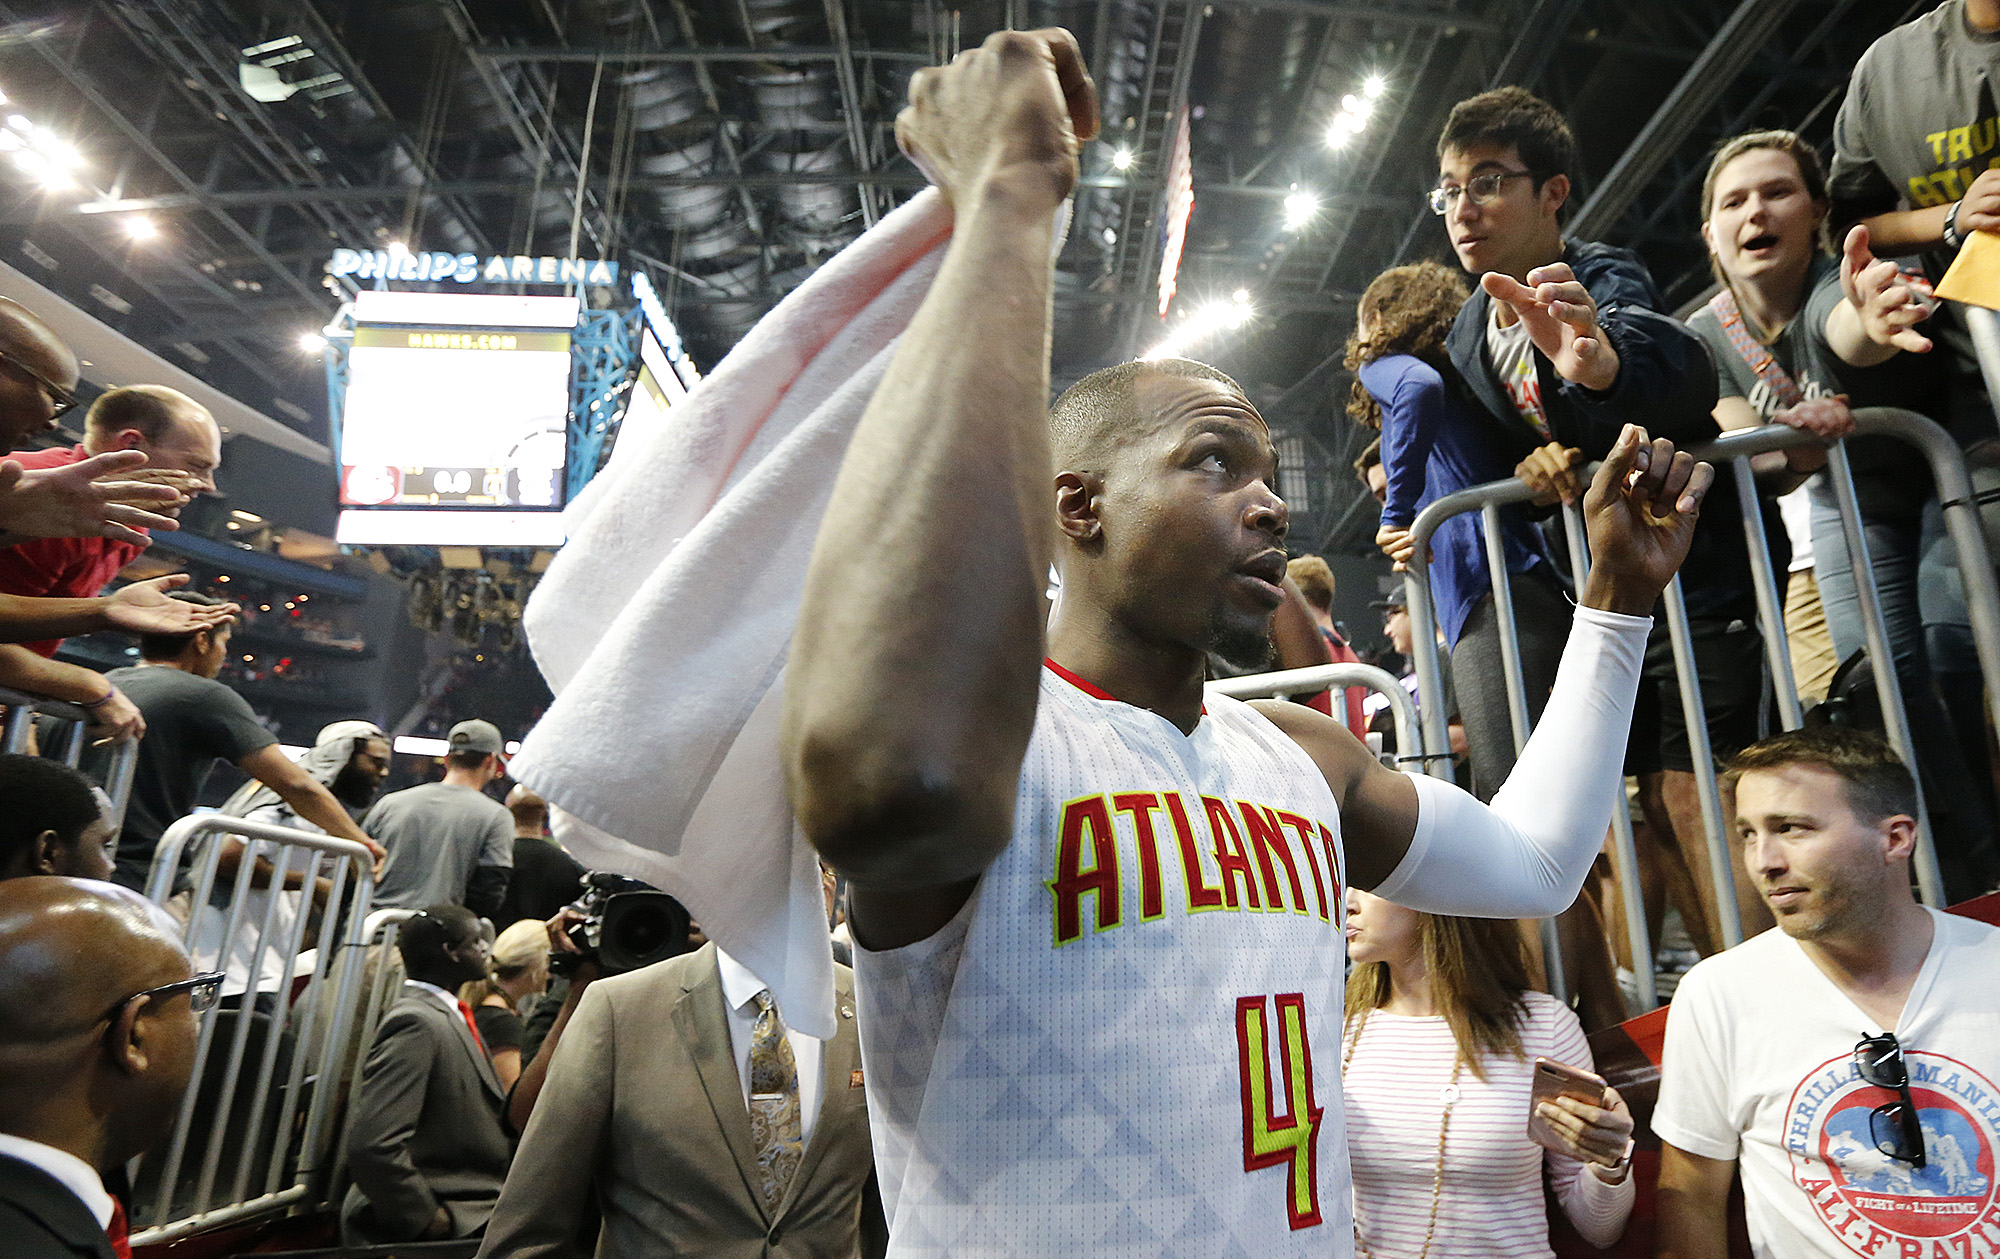 Hawks owner wants to re-sign All-Star Paul Millsap